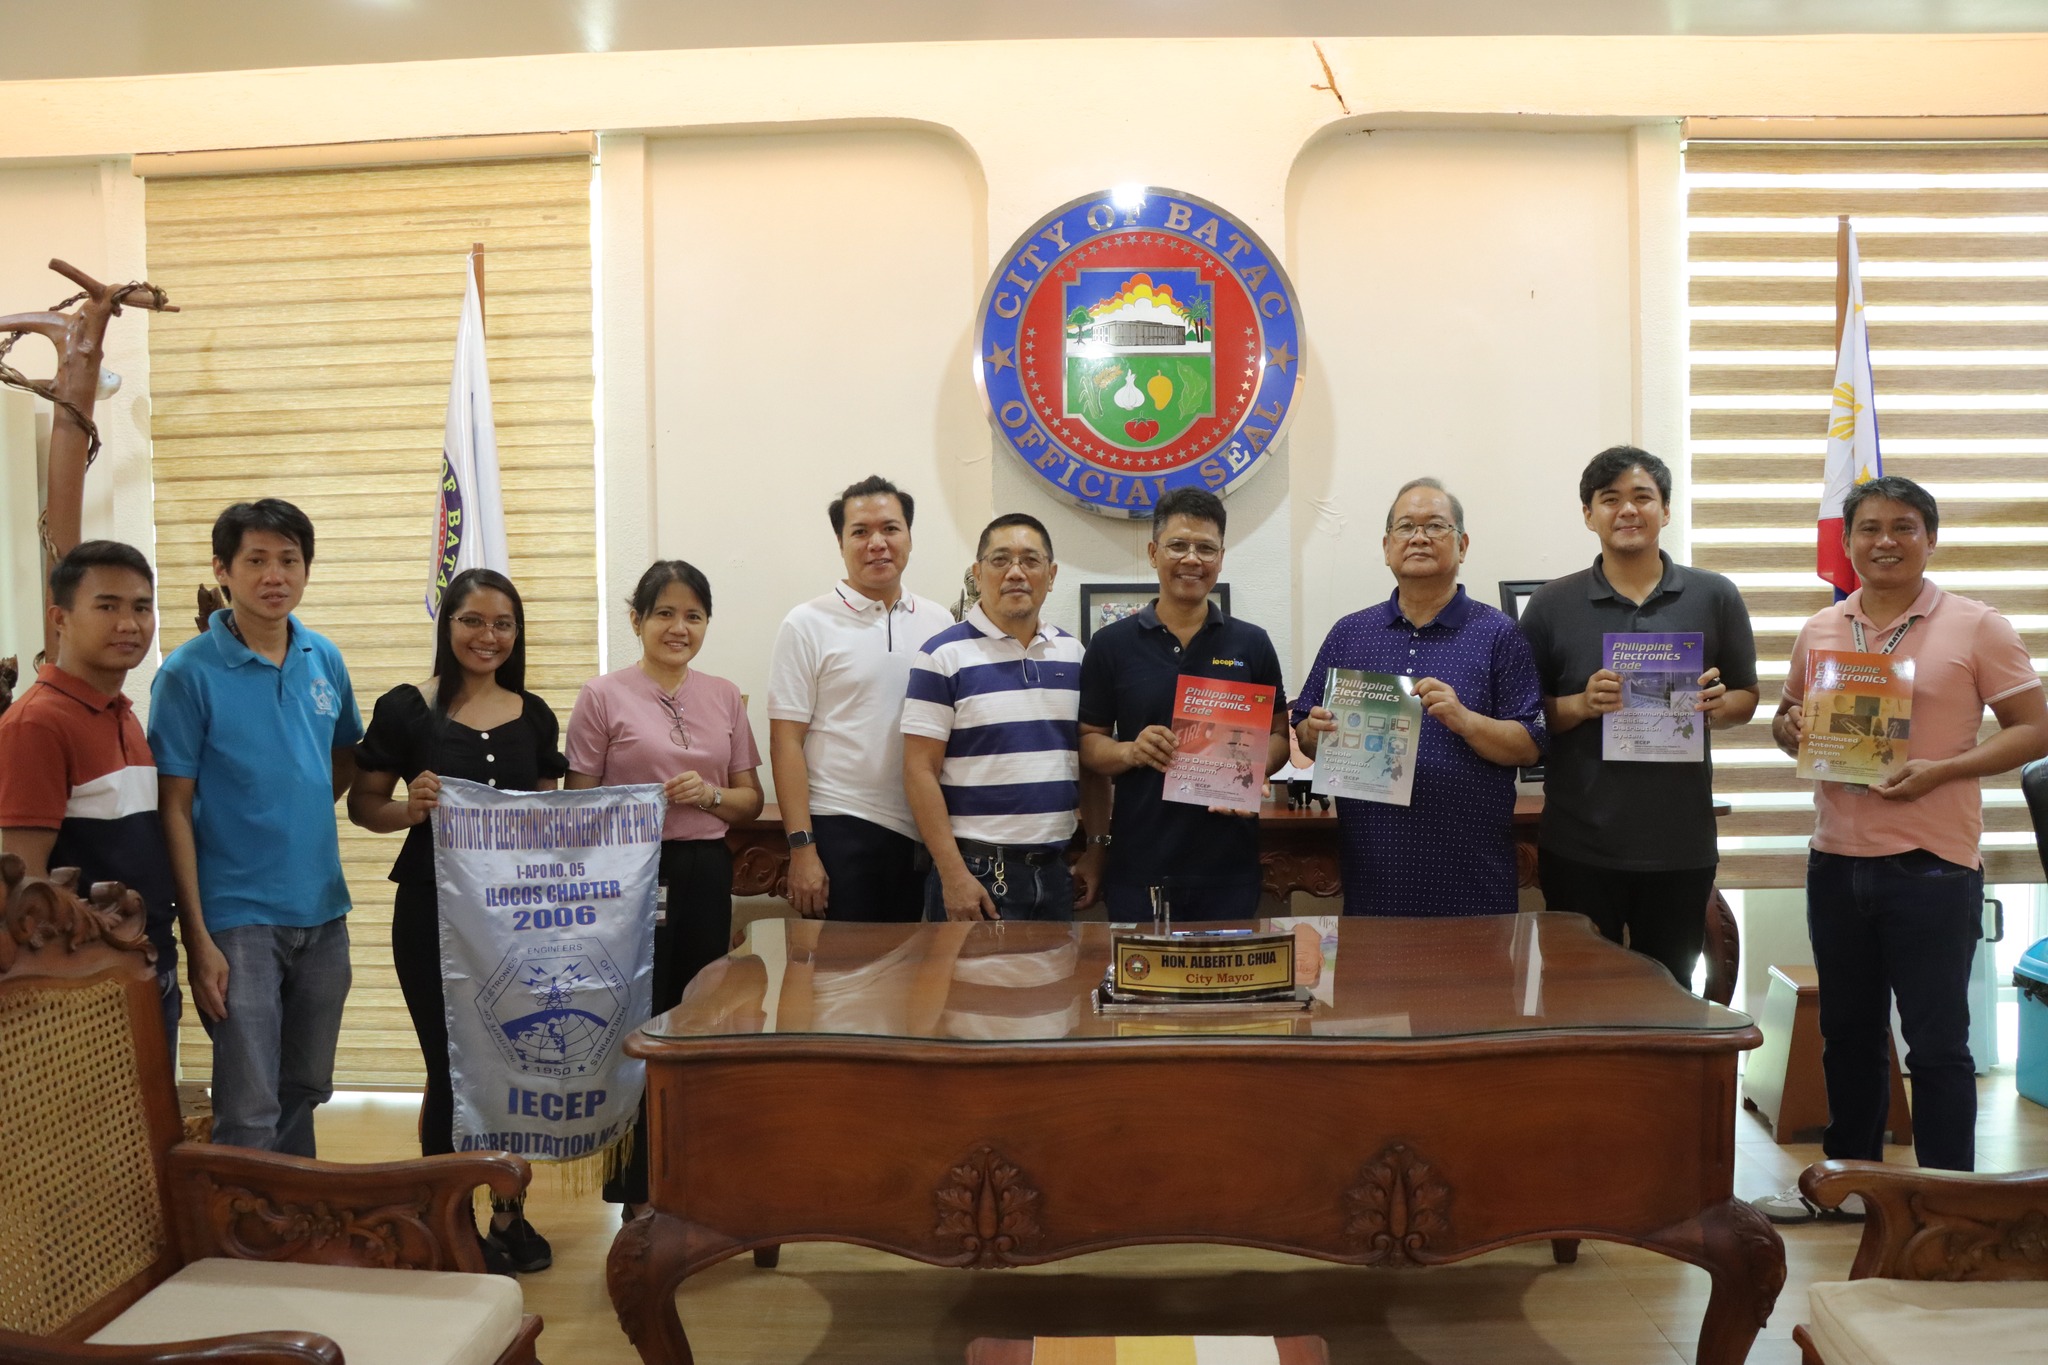 IECEP ILOCOS CHAPTER DONATES REFERENCE BOOKS TO CITY BUILDING OFFICE